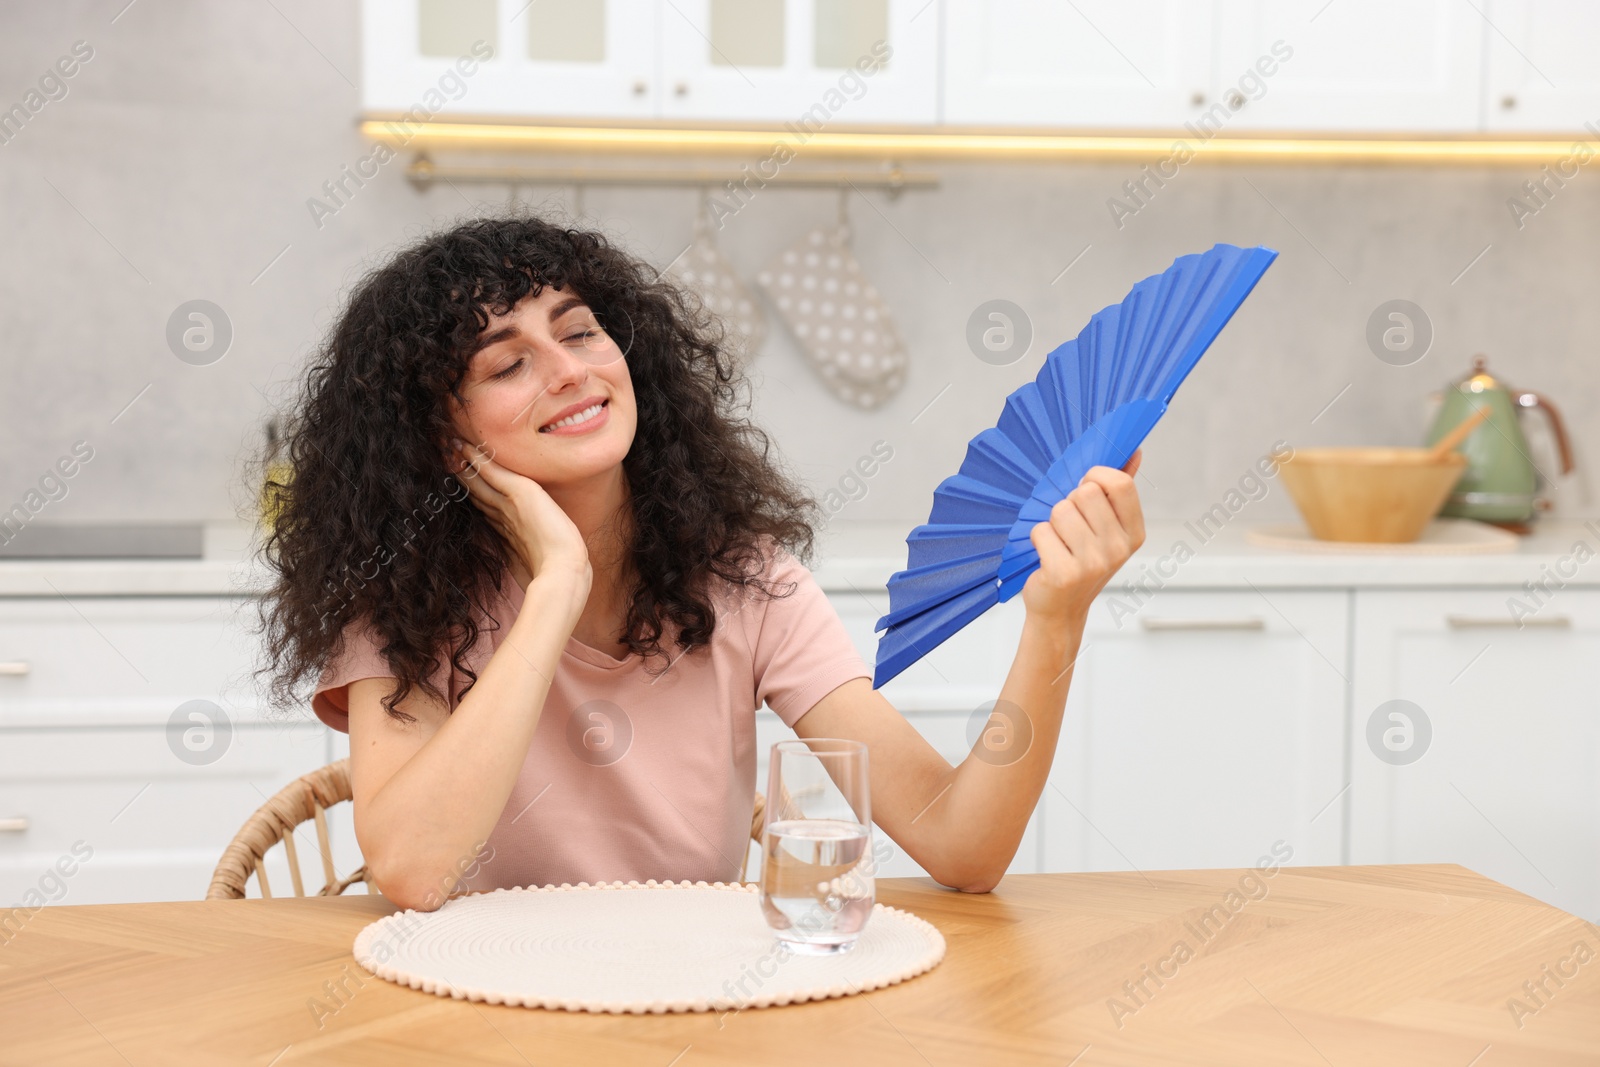 Photo of Young woman waving blue hand fan to cool herself at table in kitchen